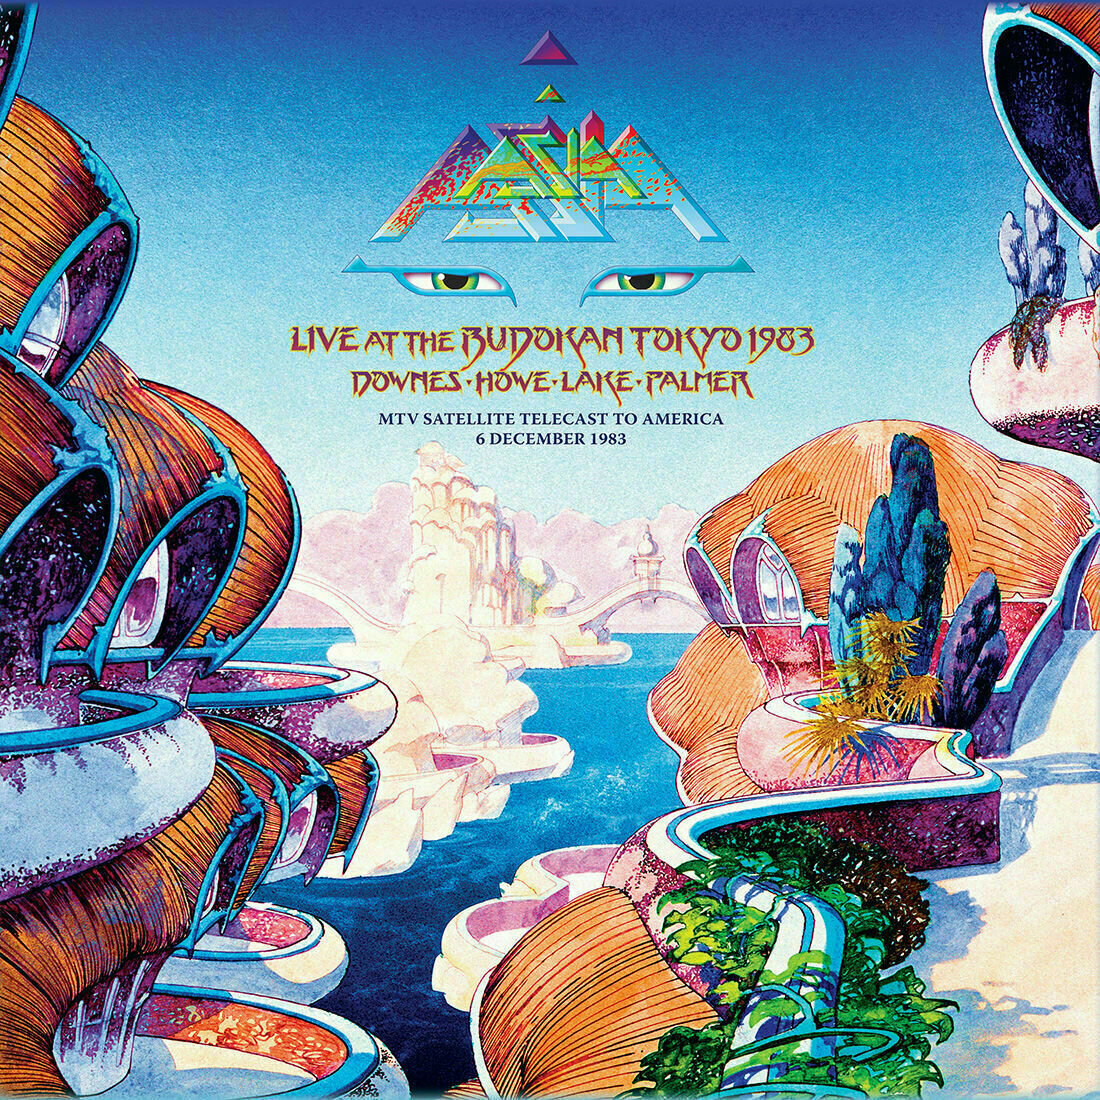 LP Asia - Asia In Asia - Live At The Budokan, Tokyo, 1983 (2 LP)